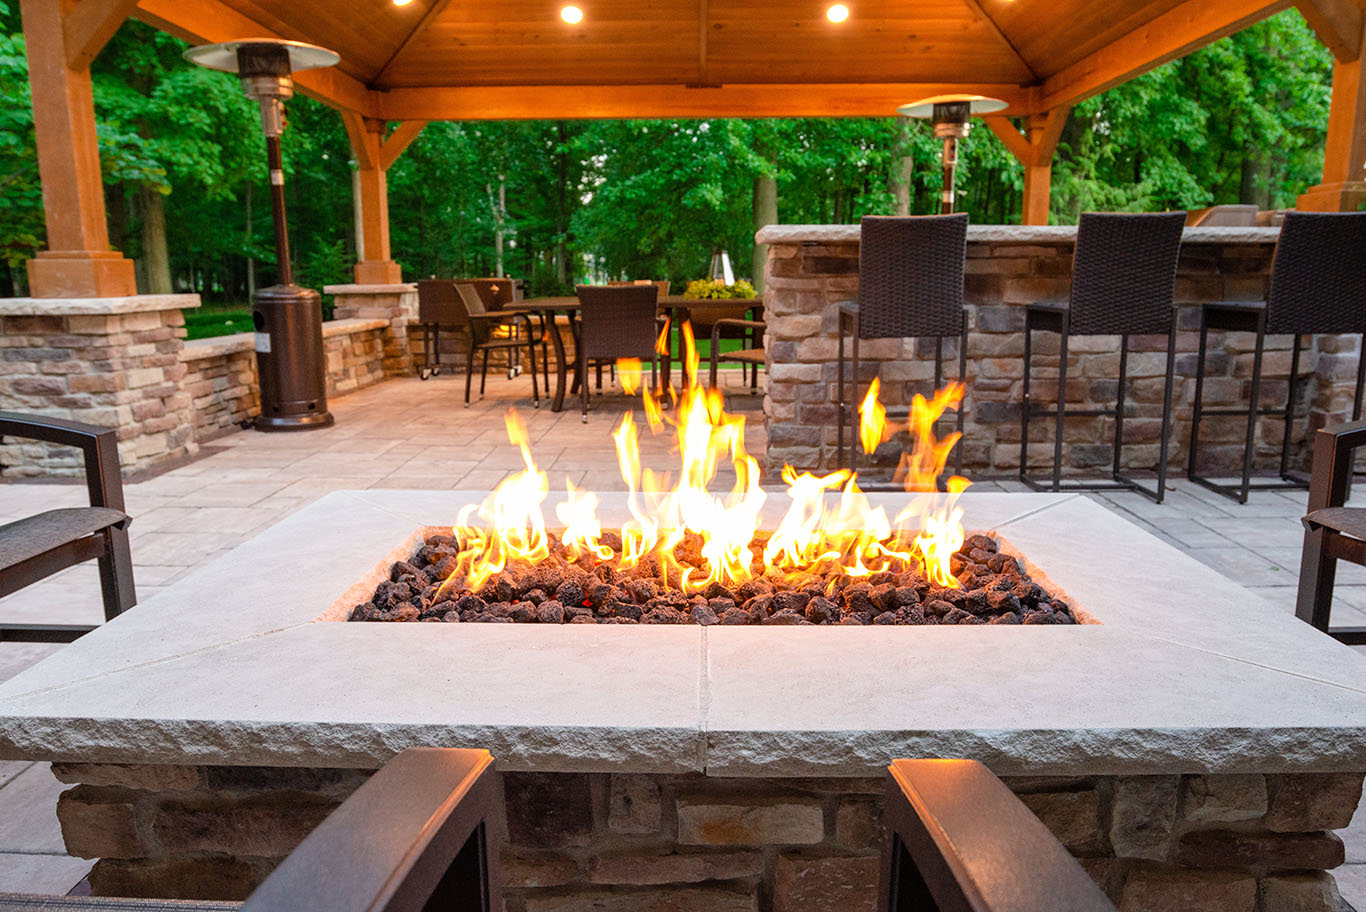 Fireplace or Fire Pit: Choosing Your Outdoor Fire Feature